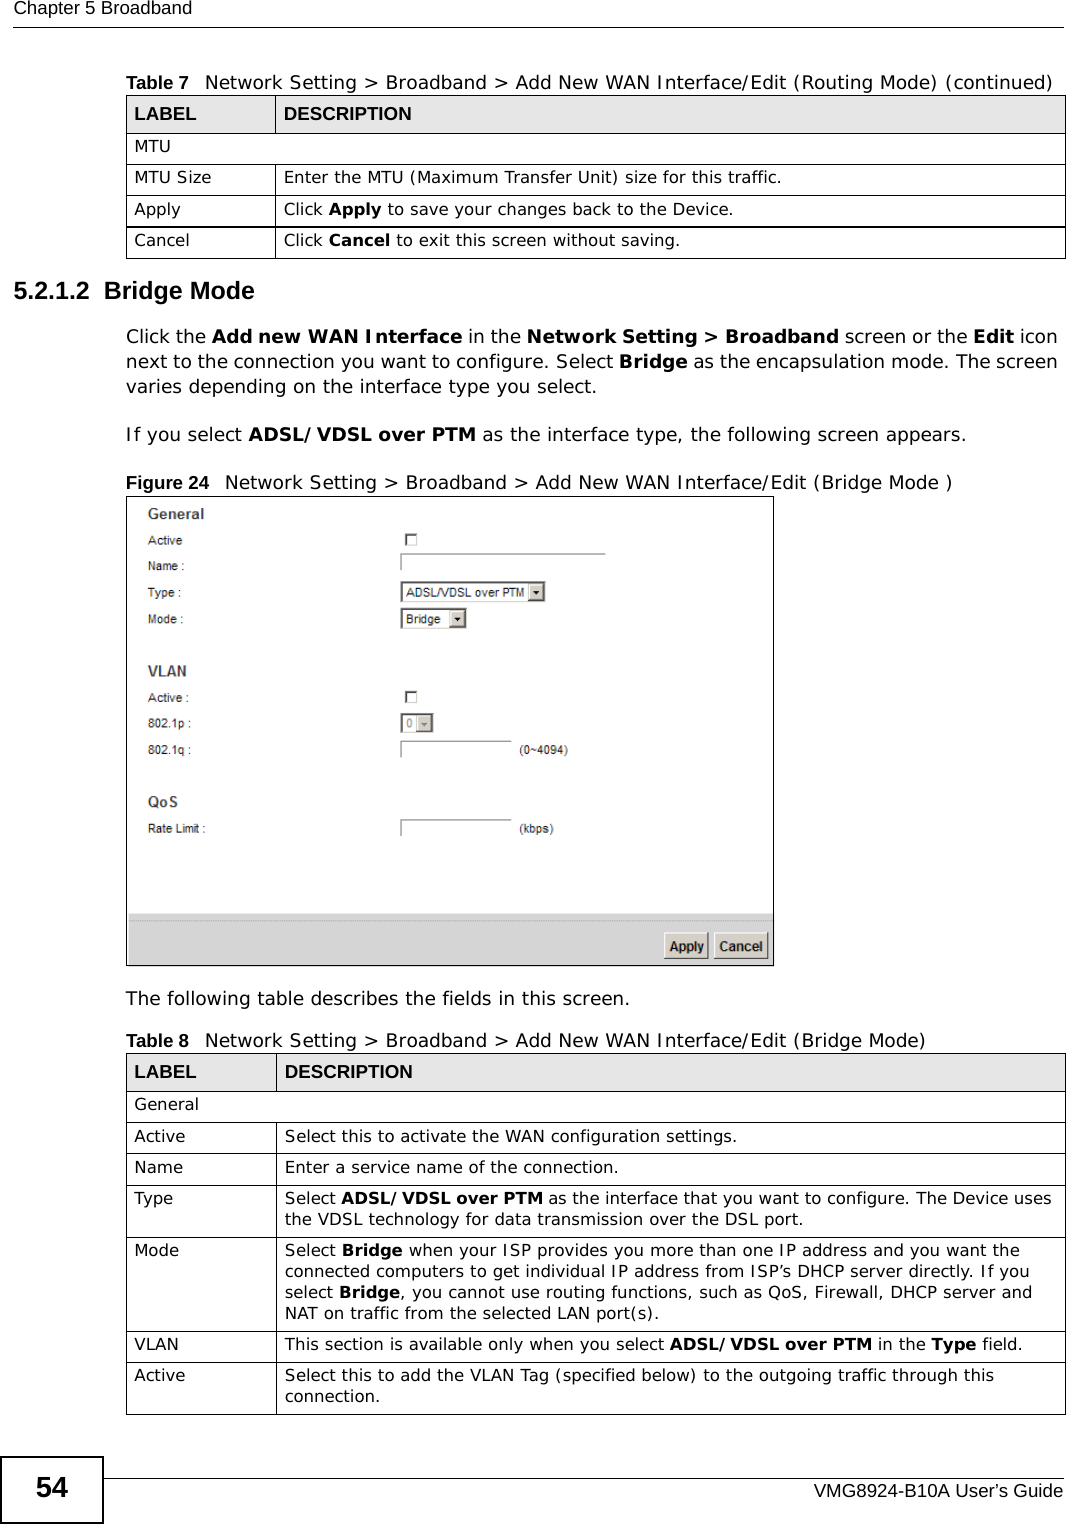 Chapter 5 BroadbandVMG8924-B10A User’s Guide545.2.1.2  Bridge ModeClick the Add new WAN Interface in the Network Setting &gt; Broadband screen or the Edit icon next to the connection you want to configure. Select Bridge as the encapsulation mode. The screen varies depending on the interface type you select. If you select ADSL/VDSL over PTM as the interface type, the following screen appears.Figure 24   Network Setting &gt; Broadband &gt; Add New WAN Interface/Edit (Bridge Mode )The following table describes the fields in this screen.MTUMTU Size Enter the MTU (Maximum Transfer Unit) size for this traffic.Apply Click Apply to save your changes back to the Device.Cancel Click Cancel to exit this screen without saving.Table 7   Network Setting &gt; Broadband &gt; Add New WAN Interface/Edit (Routing Mode) (continued)LABEL DESCRIPTIONTable 8   Network Setting &gt; Broadband &gt; Add New WAN Interface/Edit (Bridge Mode)LABEL DESCRIPTIONGeneralActive Select this to activate the WAN configuration settings.Name Enter a service name of the connection.Type Select ADSL/VDSL over PTM as the interface that you want to configure. The Device uses the VDSL technology for data transmission over the DSL port.Mode Select Bridge when your ISP provides you more than one IP address and you want the connected computers to get individual IP address from ISP’s DHCP server directly. If you select Bridge, you cannot use routing functions, such as QoS, Firewall, DHCP server and NAT on traffic from the selected LAN port(s).VLAN This section is available only when you select ADSL/VDSL over PTM in the Type field.Active Select this to add the VLAN Tag (specified below) to the outgoing traffic through this connection.